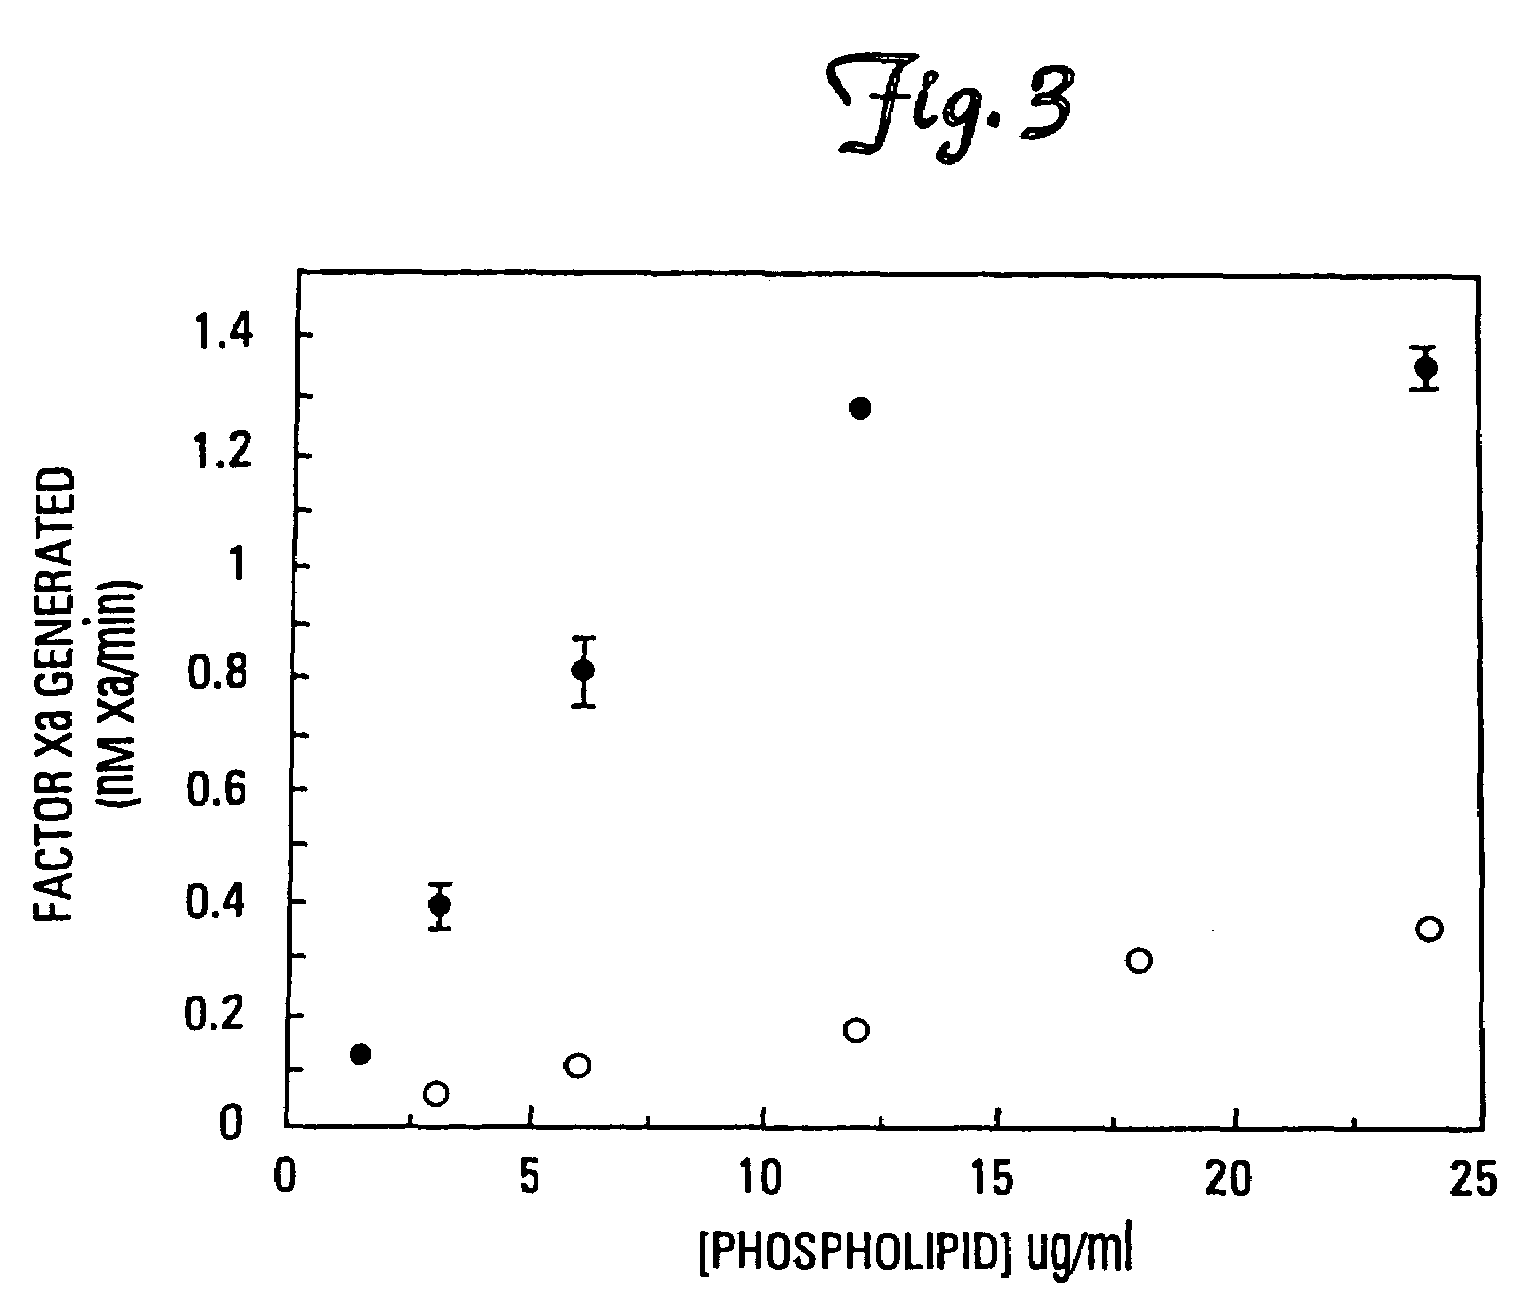 Modified vitamin K-dependent polypeptides